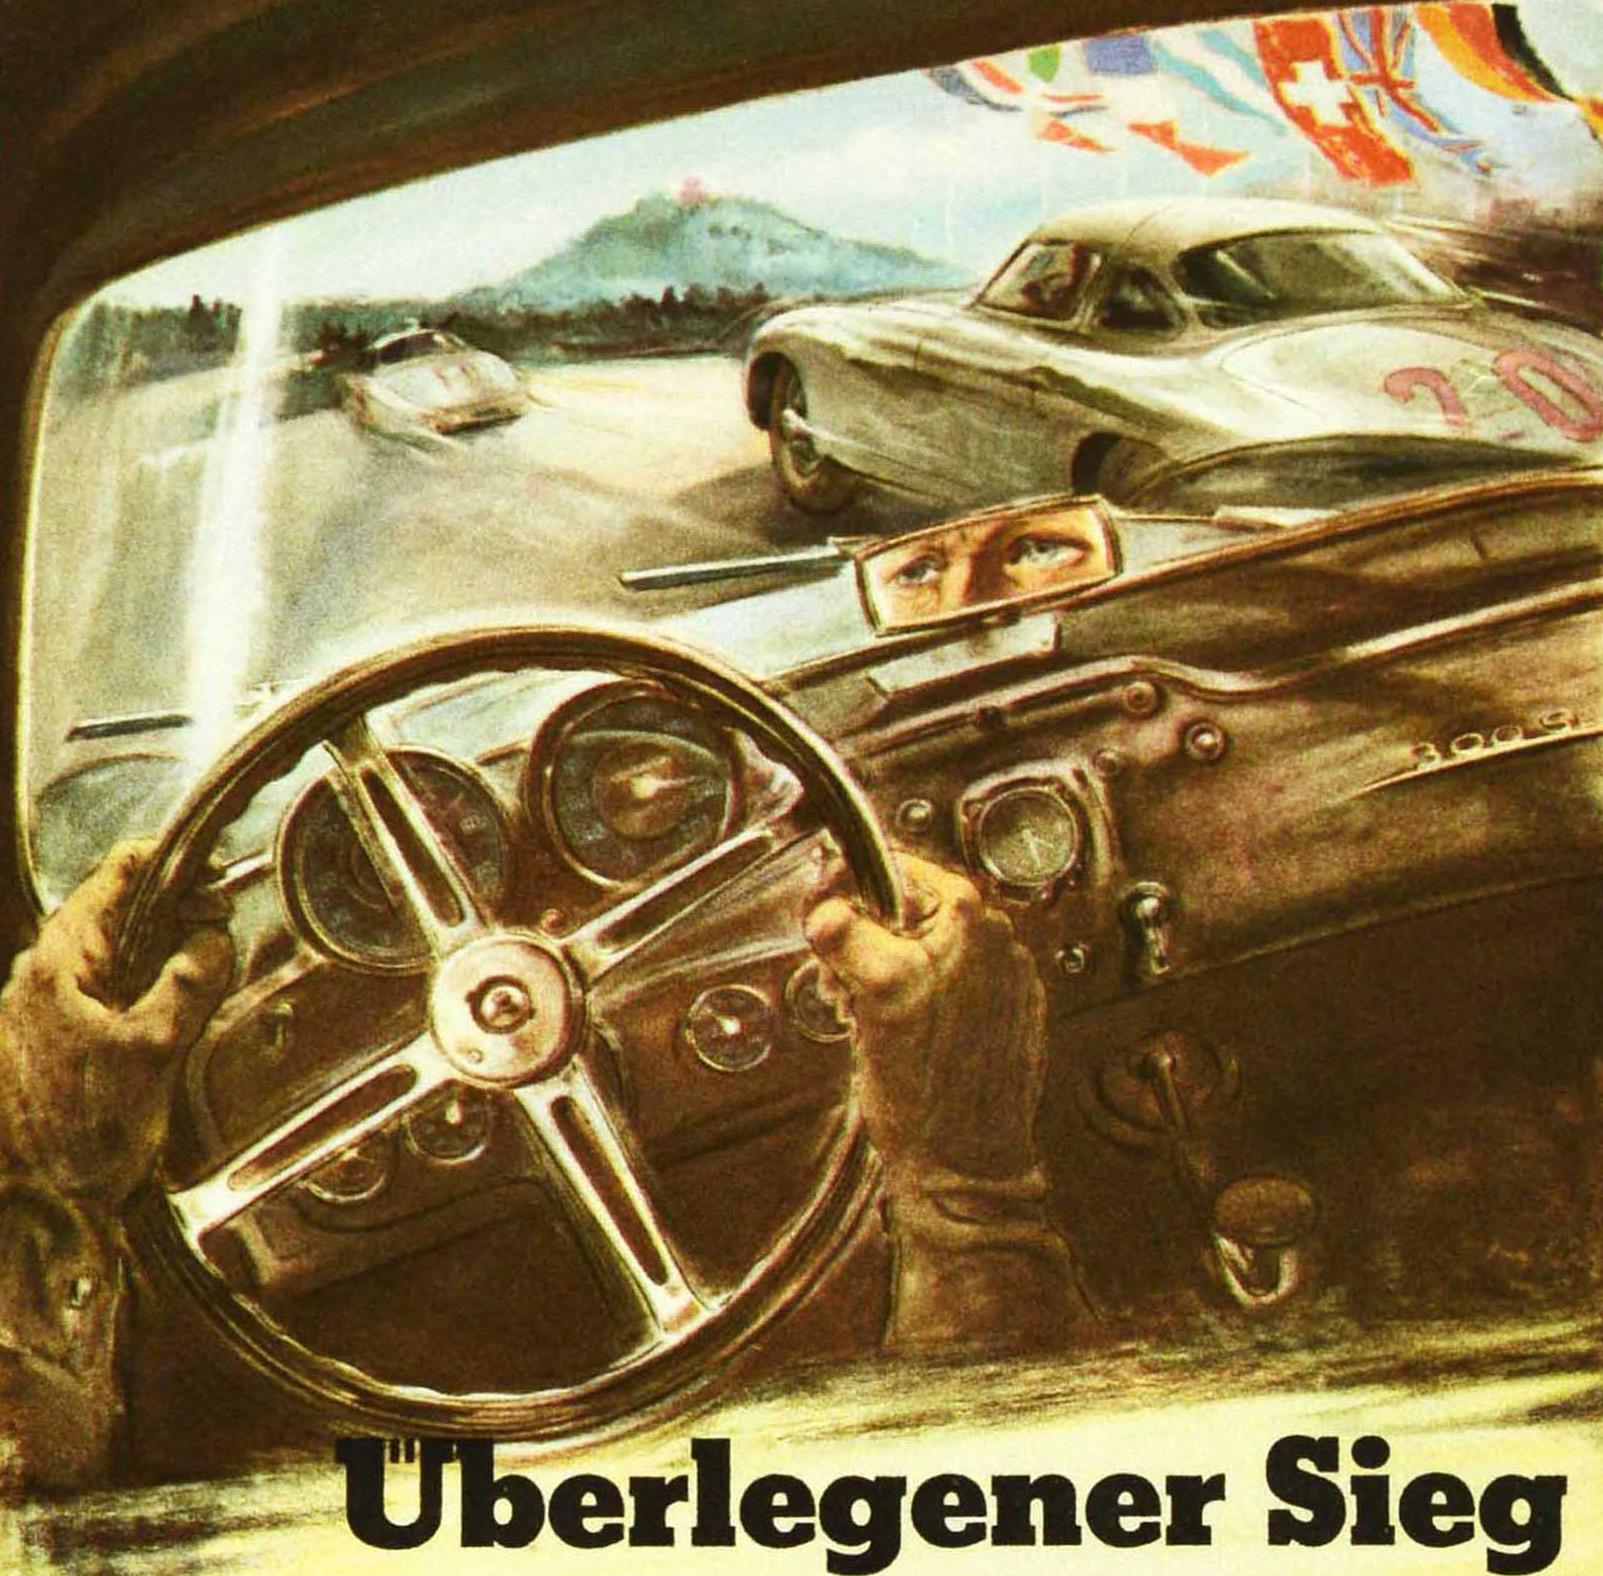 Original vintage motor sport advertising poster celebrating the Mercedes-Benz victory at the Nurburgring Great Jubilee Prize for sports cars setting the fastest lap and a new track record - Mercedes Benz Uberlegener Sieg im Grossen Jubilaumspreis